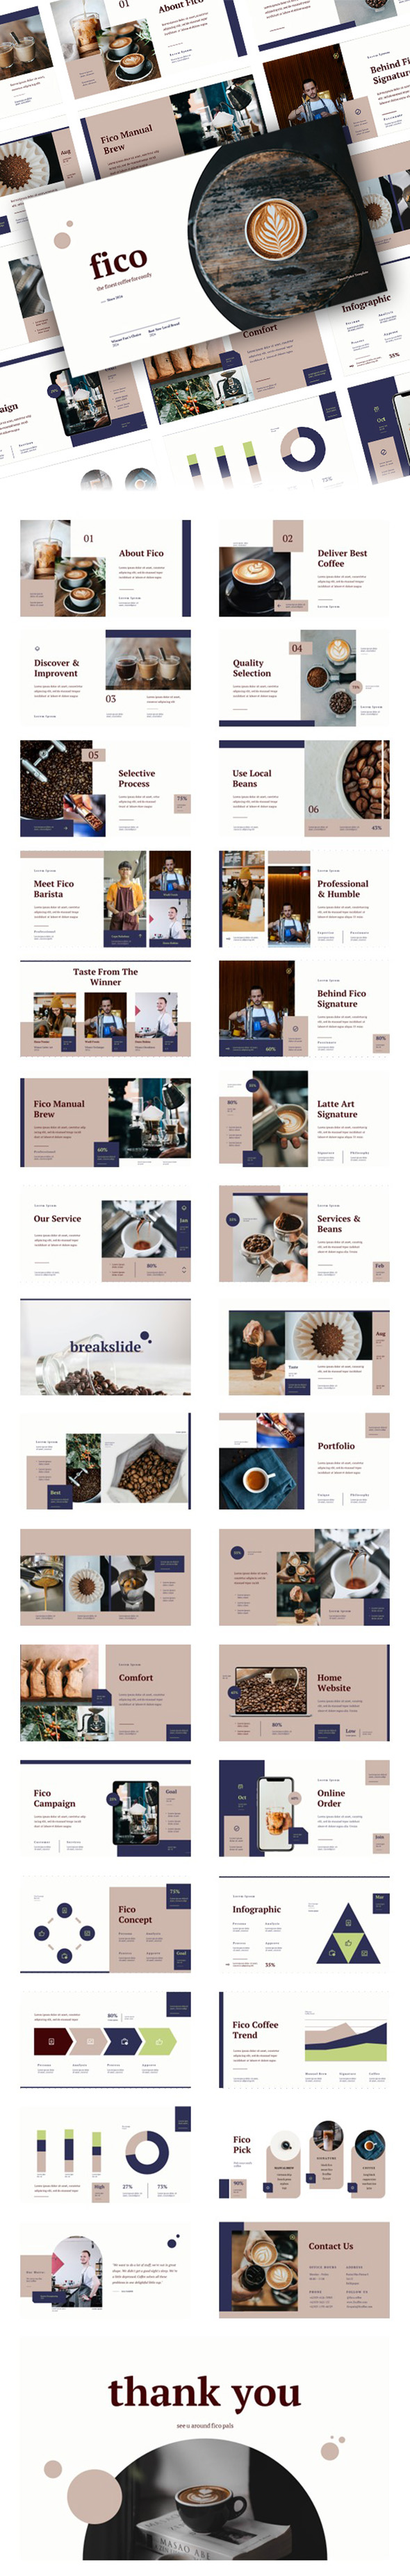 Fico - Cafe Powerpoint Template